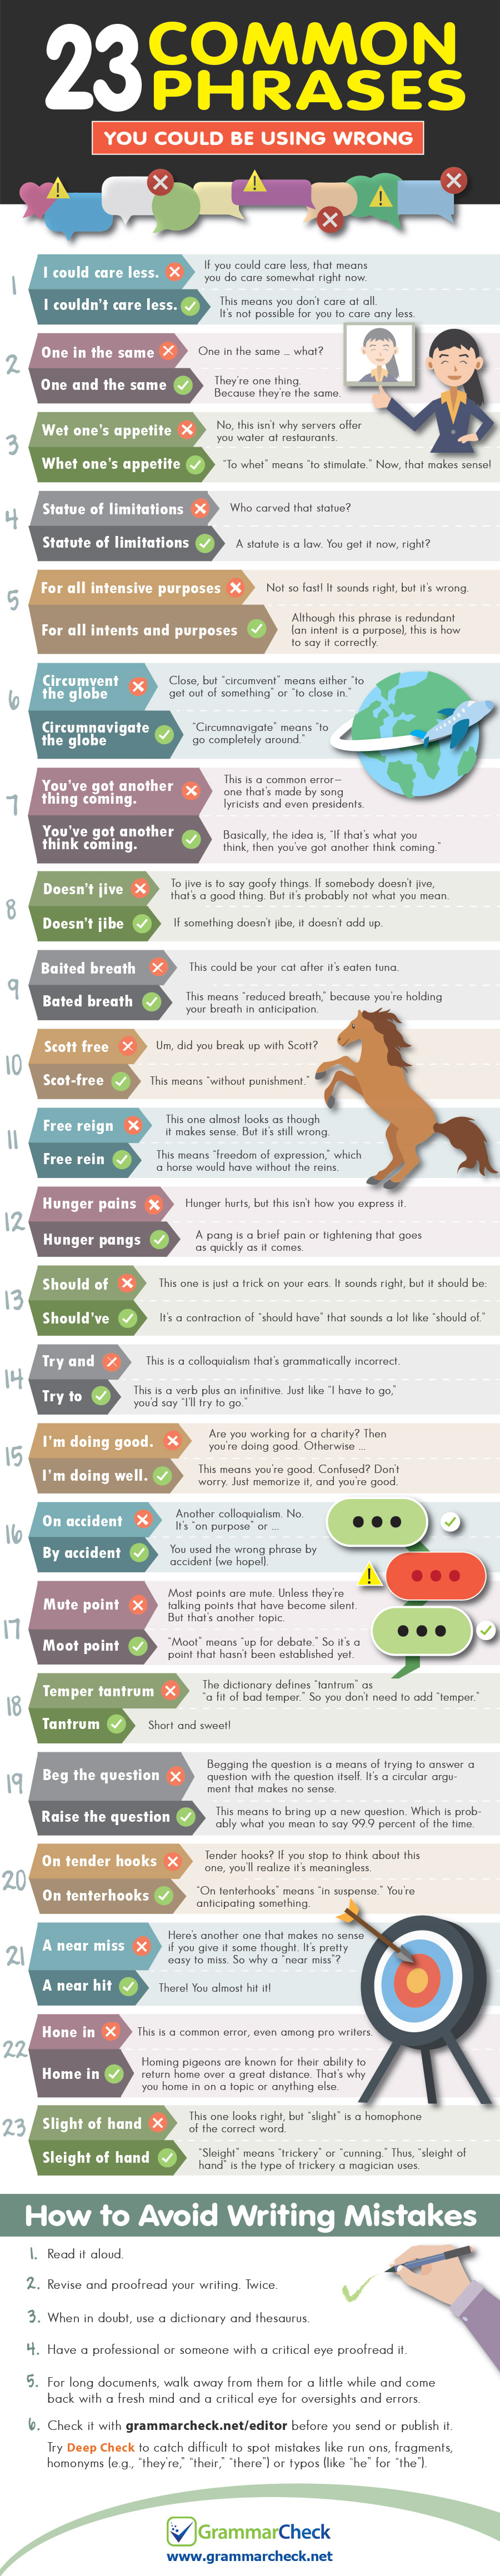 23 Common Phrases You Could be Using Wrong (Infographic)